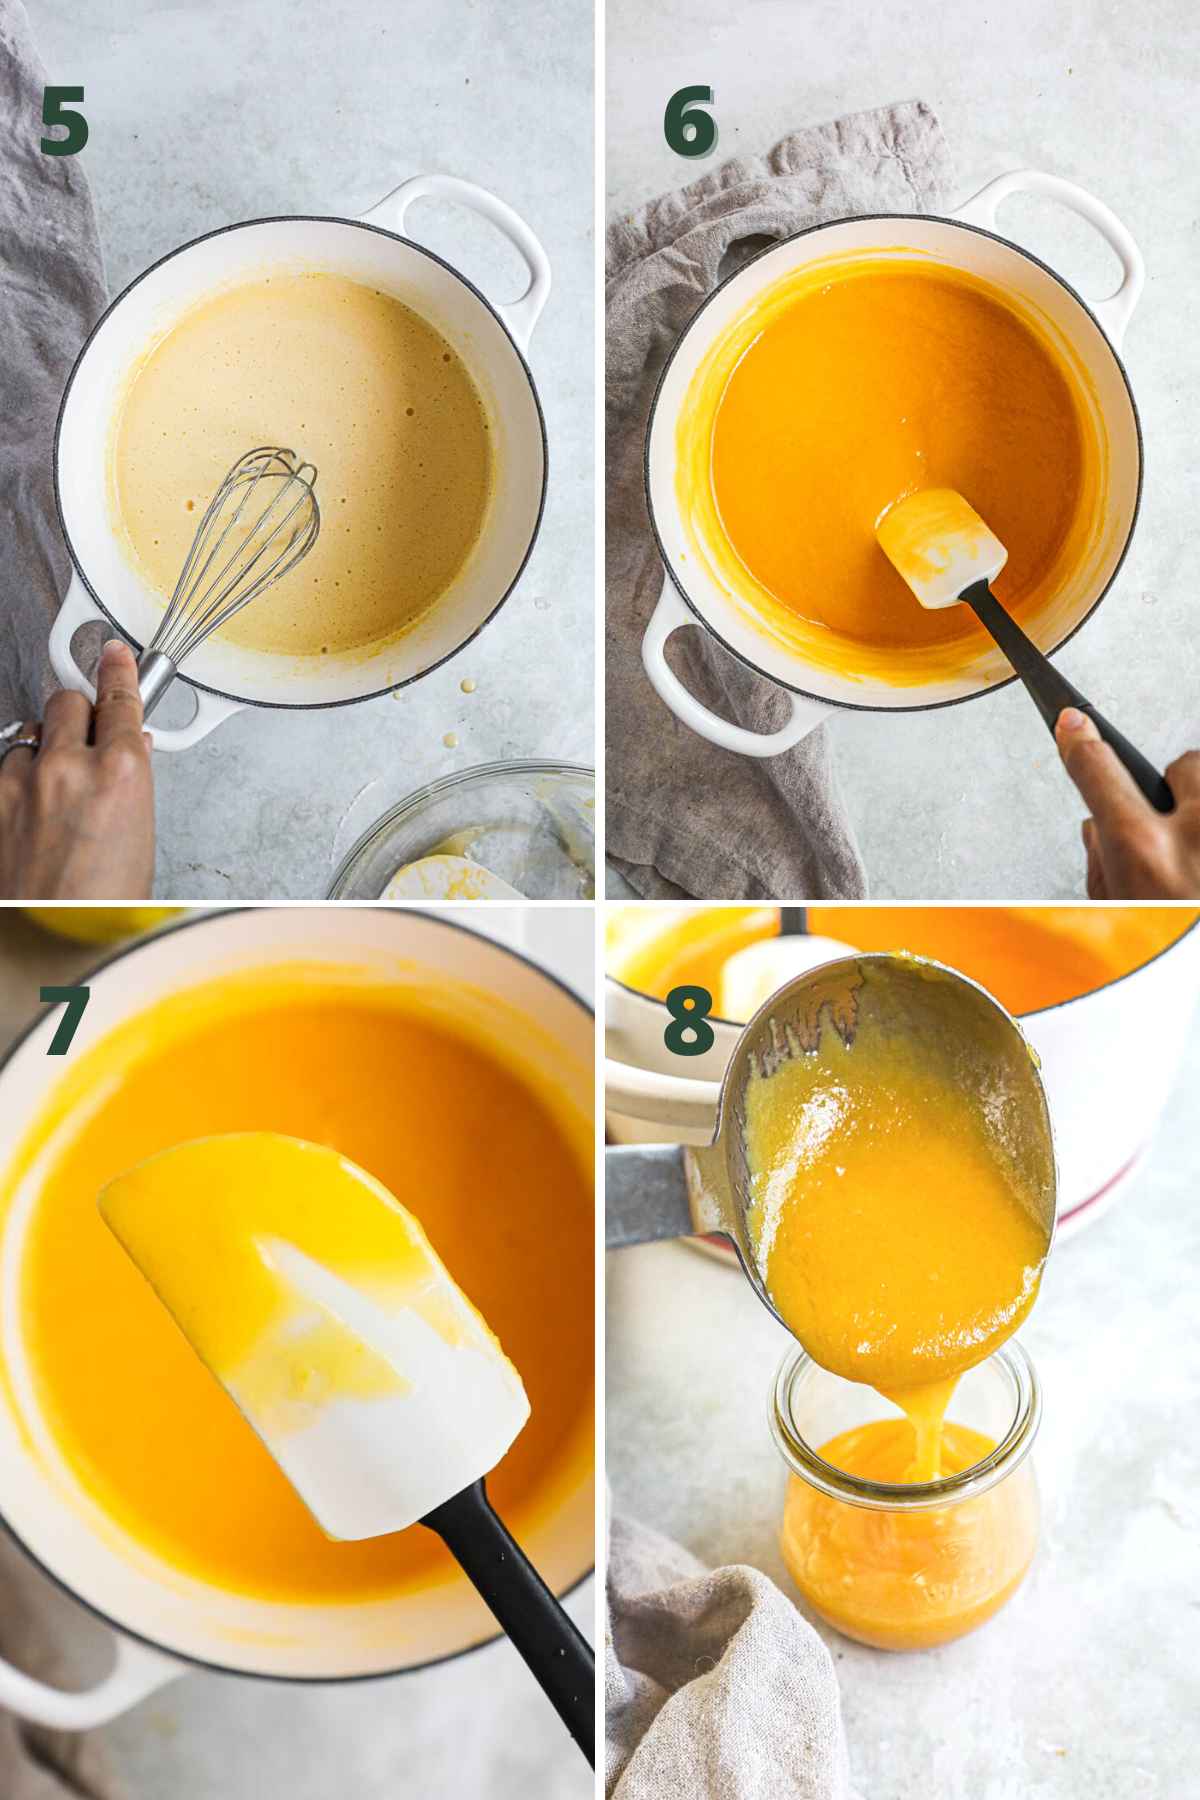 Steps to make passion fruit curd (lilikoi butter), adding remaining egg mixture, whisking curd, testing doneness, and pouring into a jar.